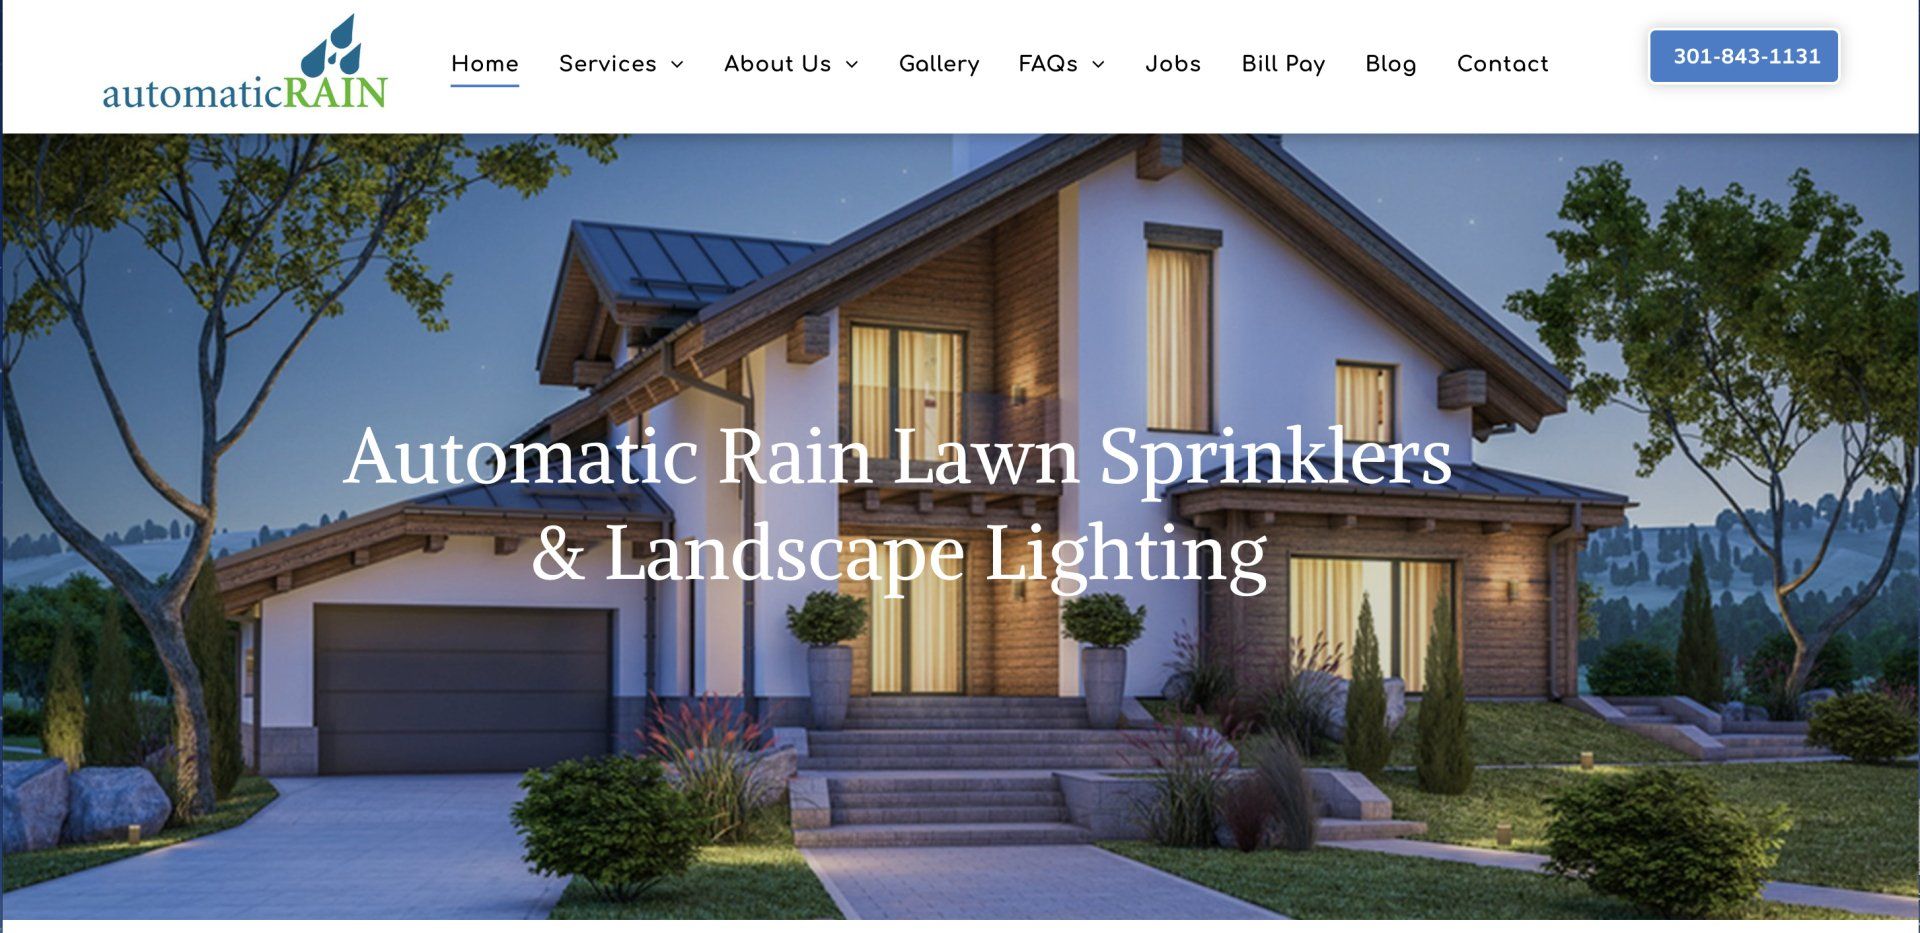 A screenshot of a website for automatic rain lawn sprinklers and landscape lighting.